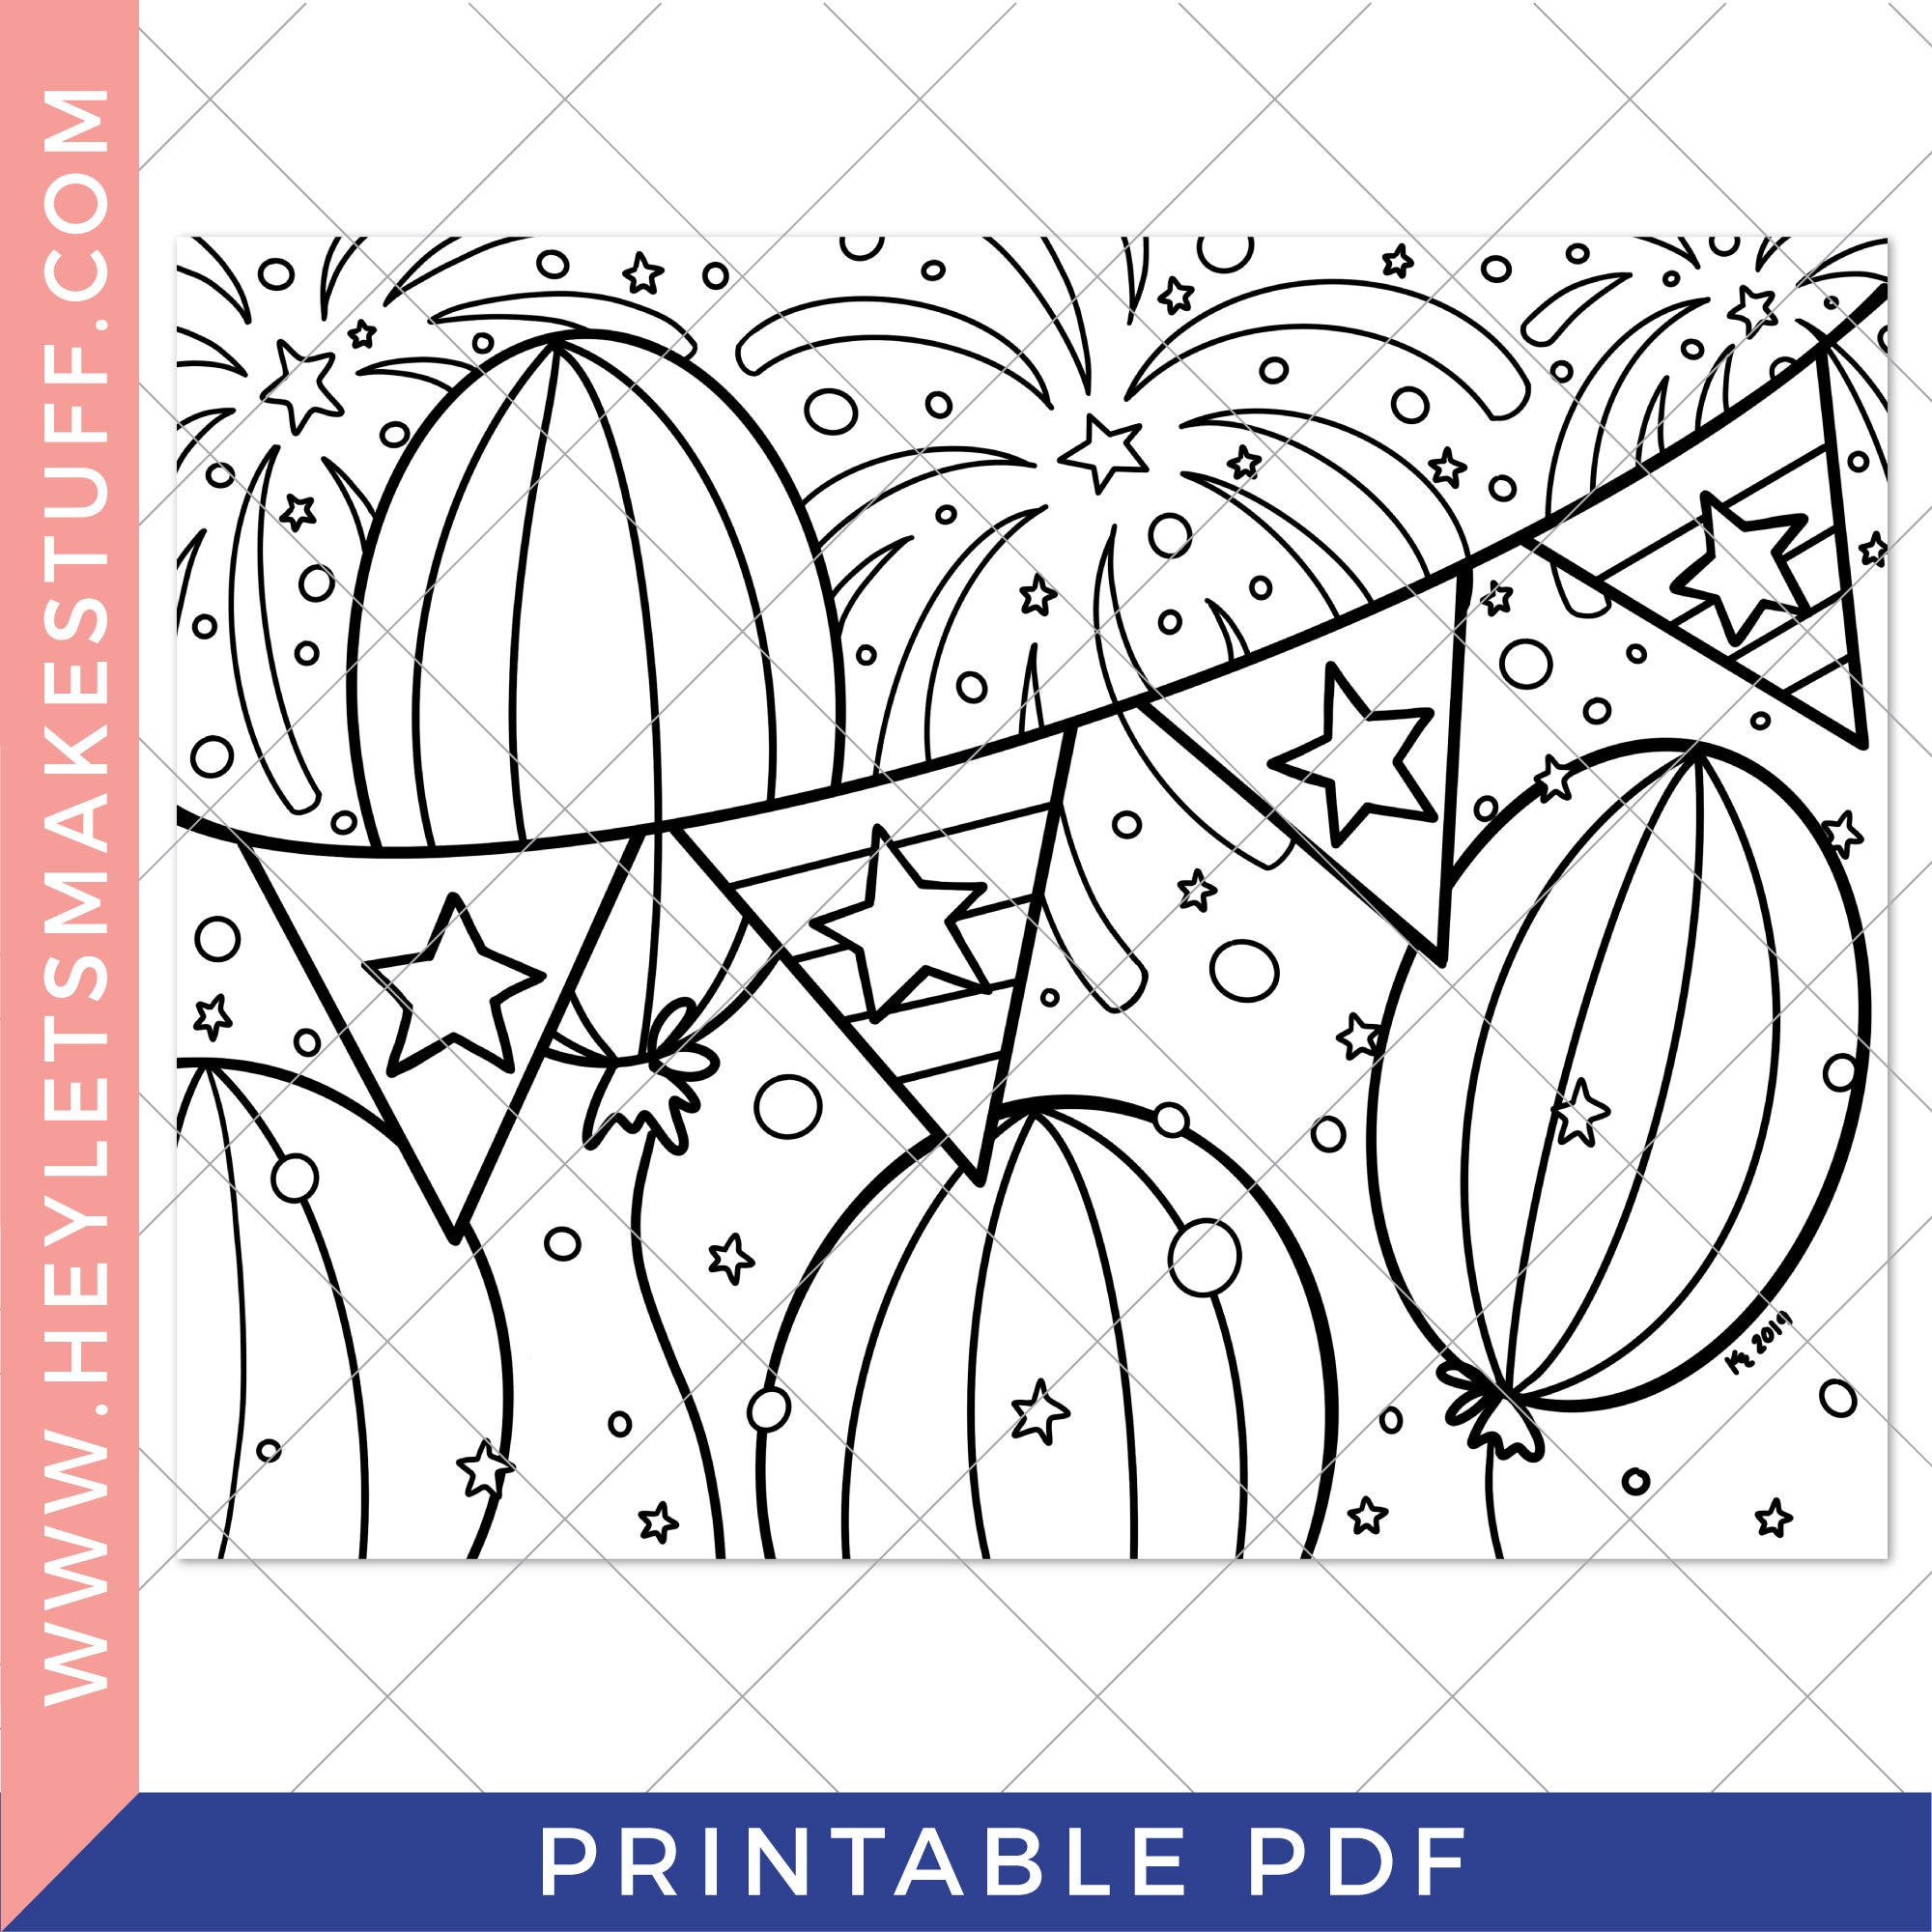 Printable 4th of July Coloring Page – Hey, Let's Make Stuff